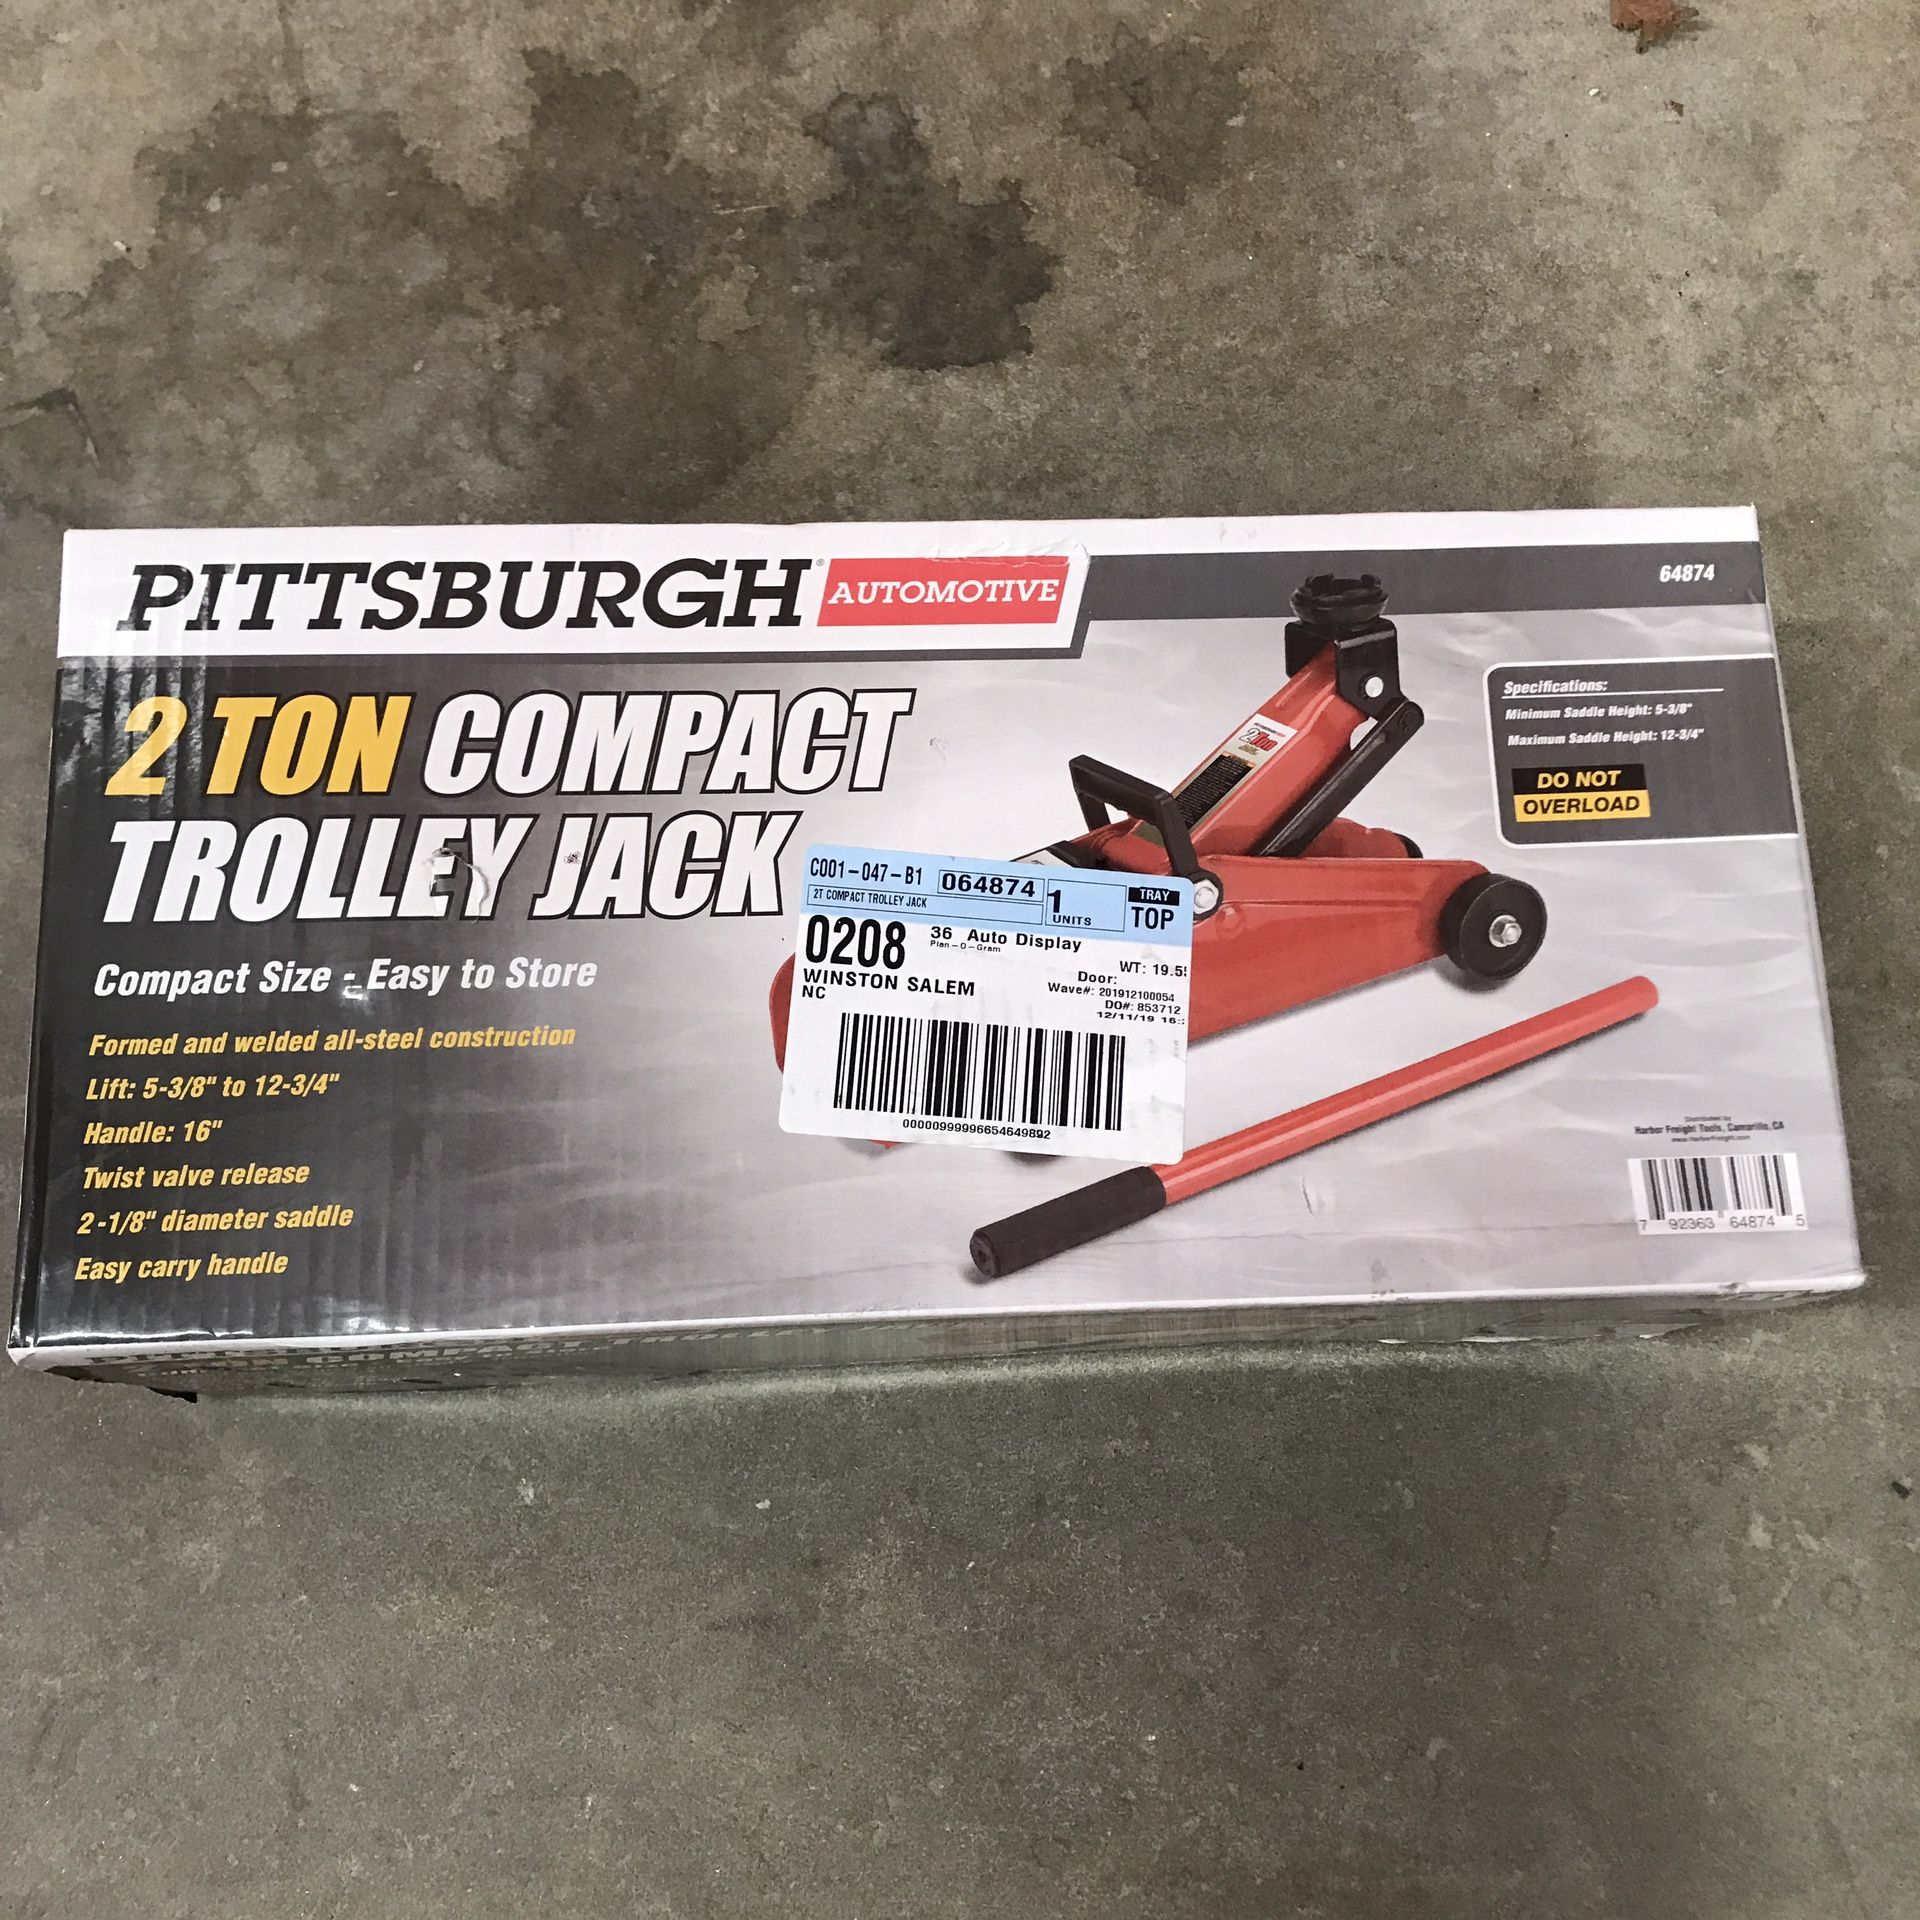 2 ton trolley jack new in box never used